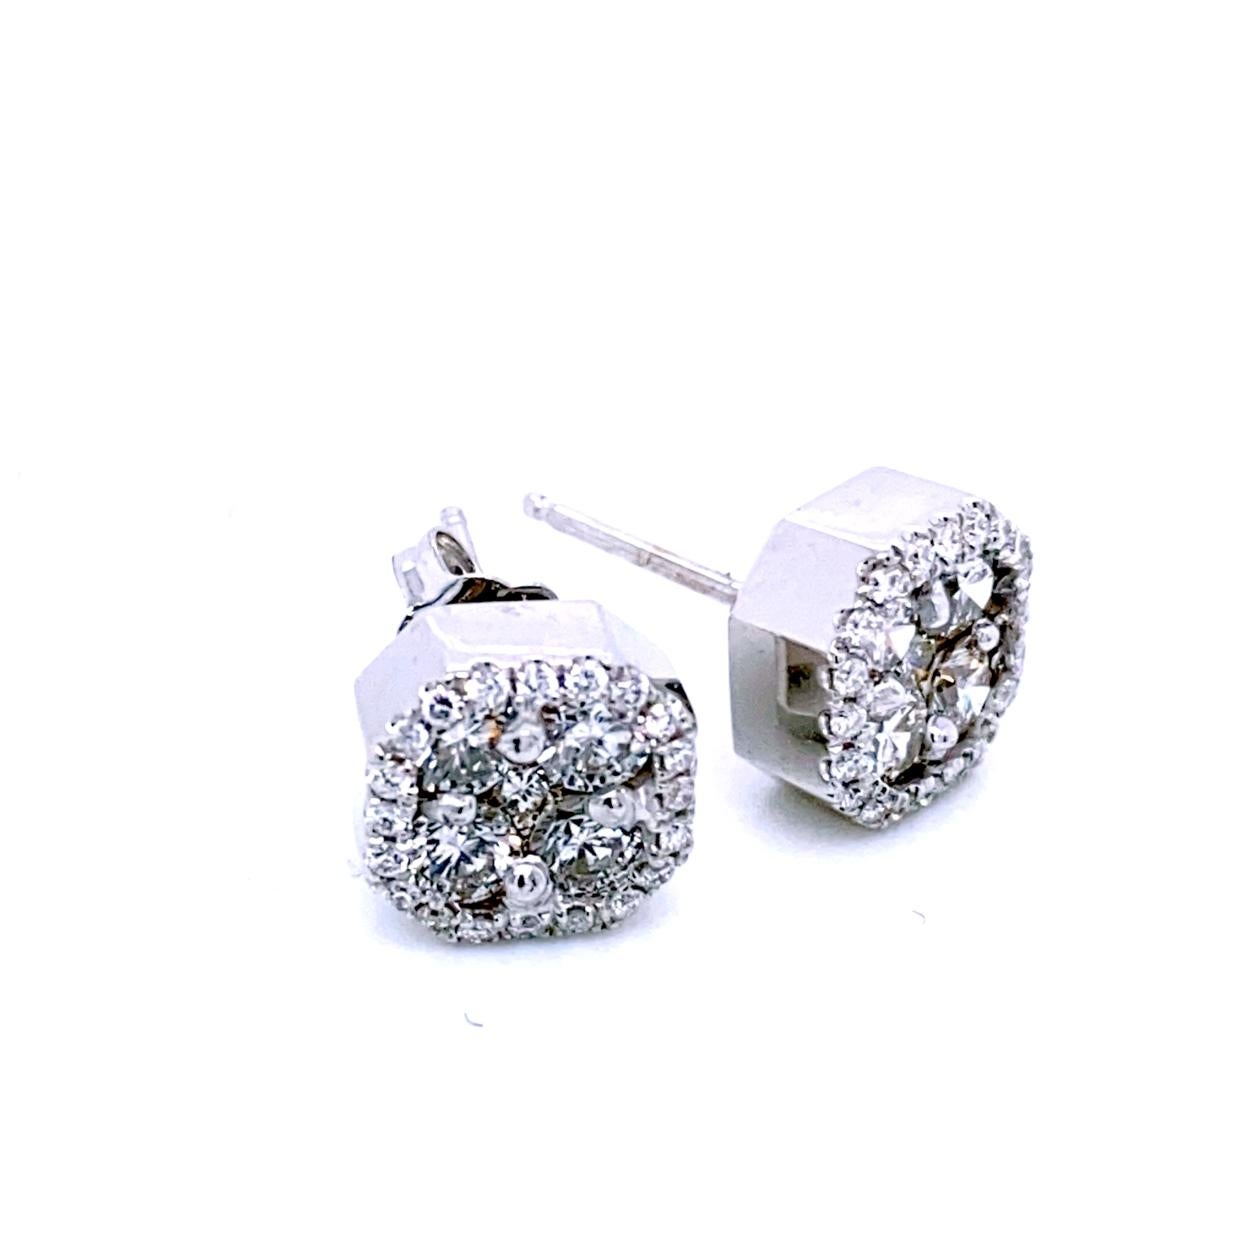 This beautiful pair of earrings are made in 14K Gold with 8 pieces of 3.2mm Round Brilliant Diamonds Invisible set with 2 pieces of 2.0mm Round Brilliant diamonds in the middle to create a seamless look placed in the center of a square halo pave set